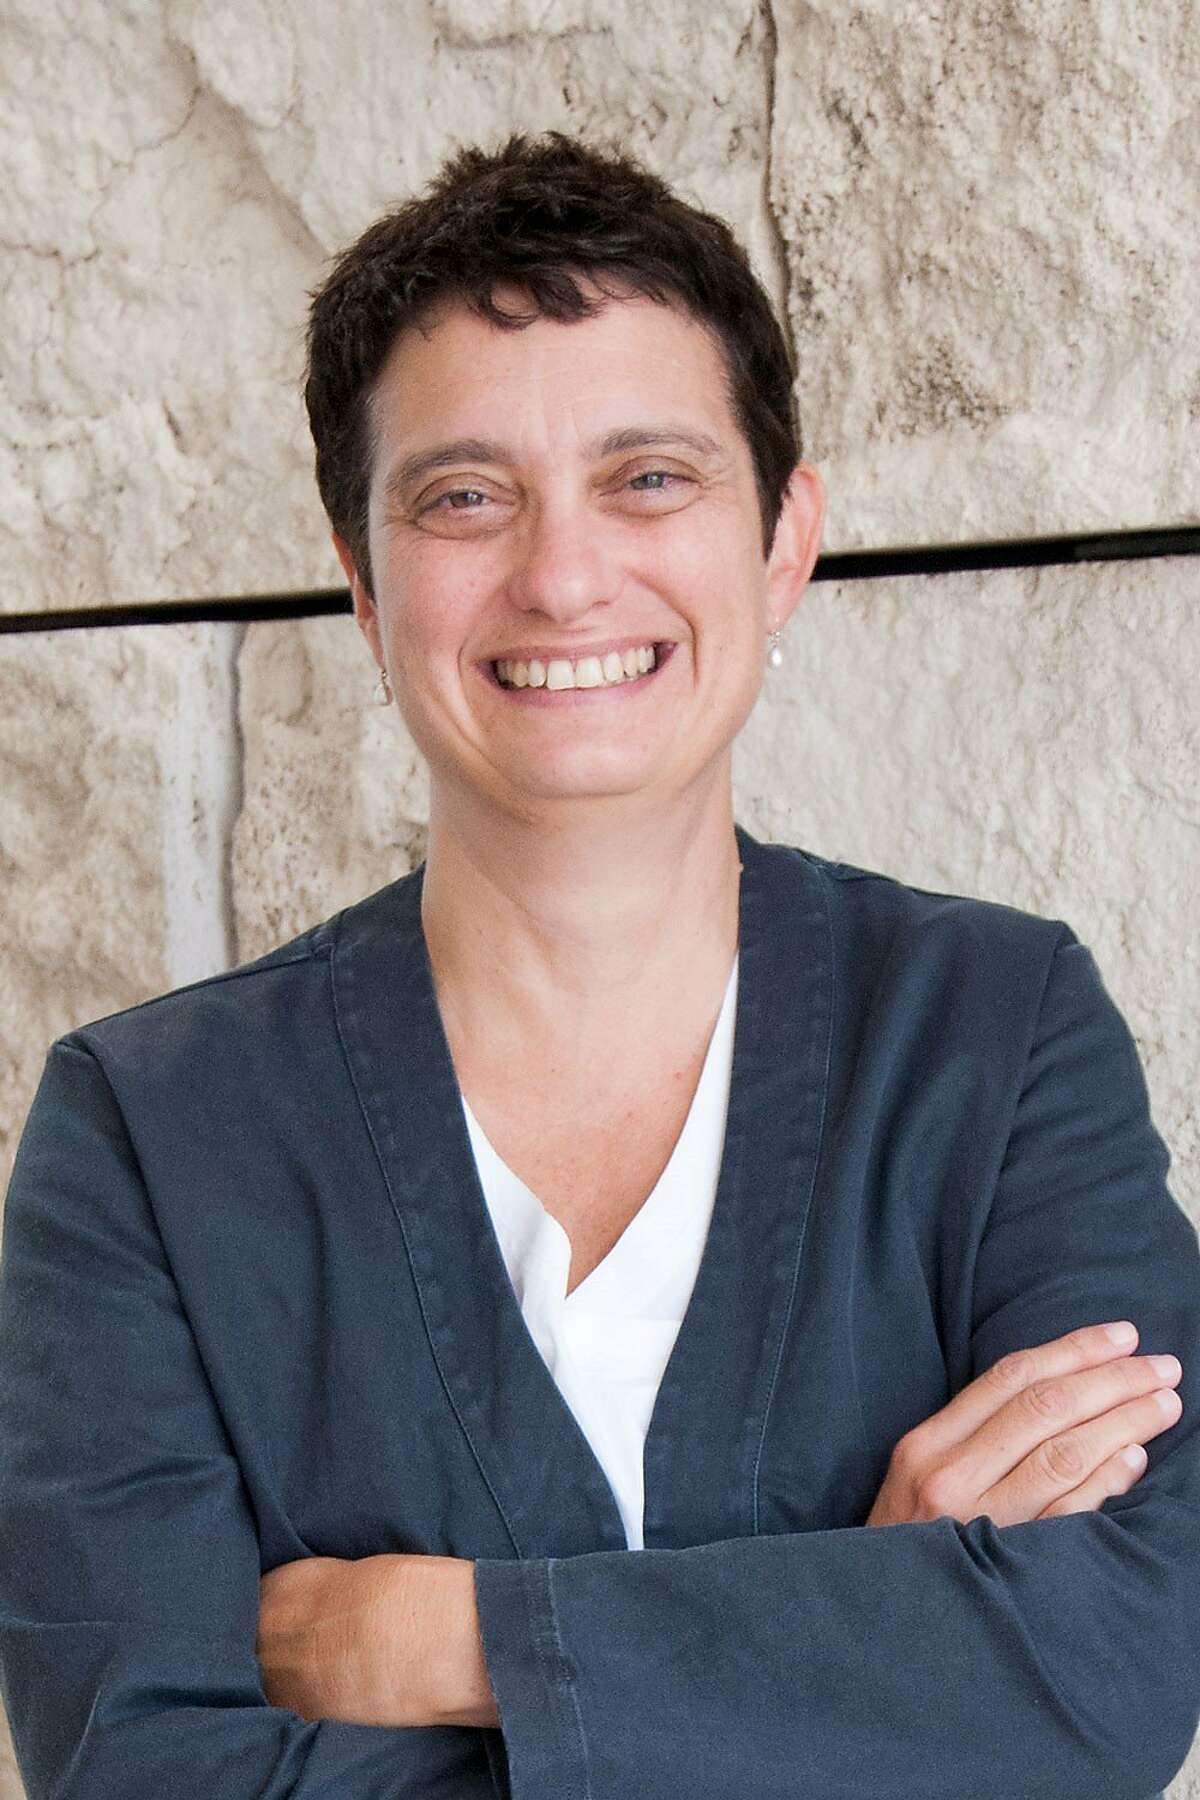 Susan Dackerman, new director of the Cantor Arts Center at Stanford